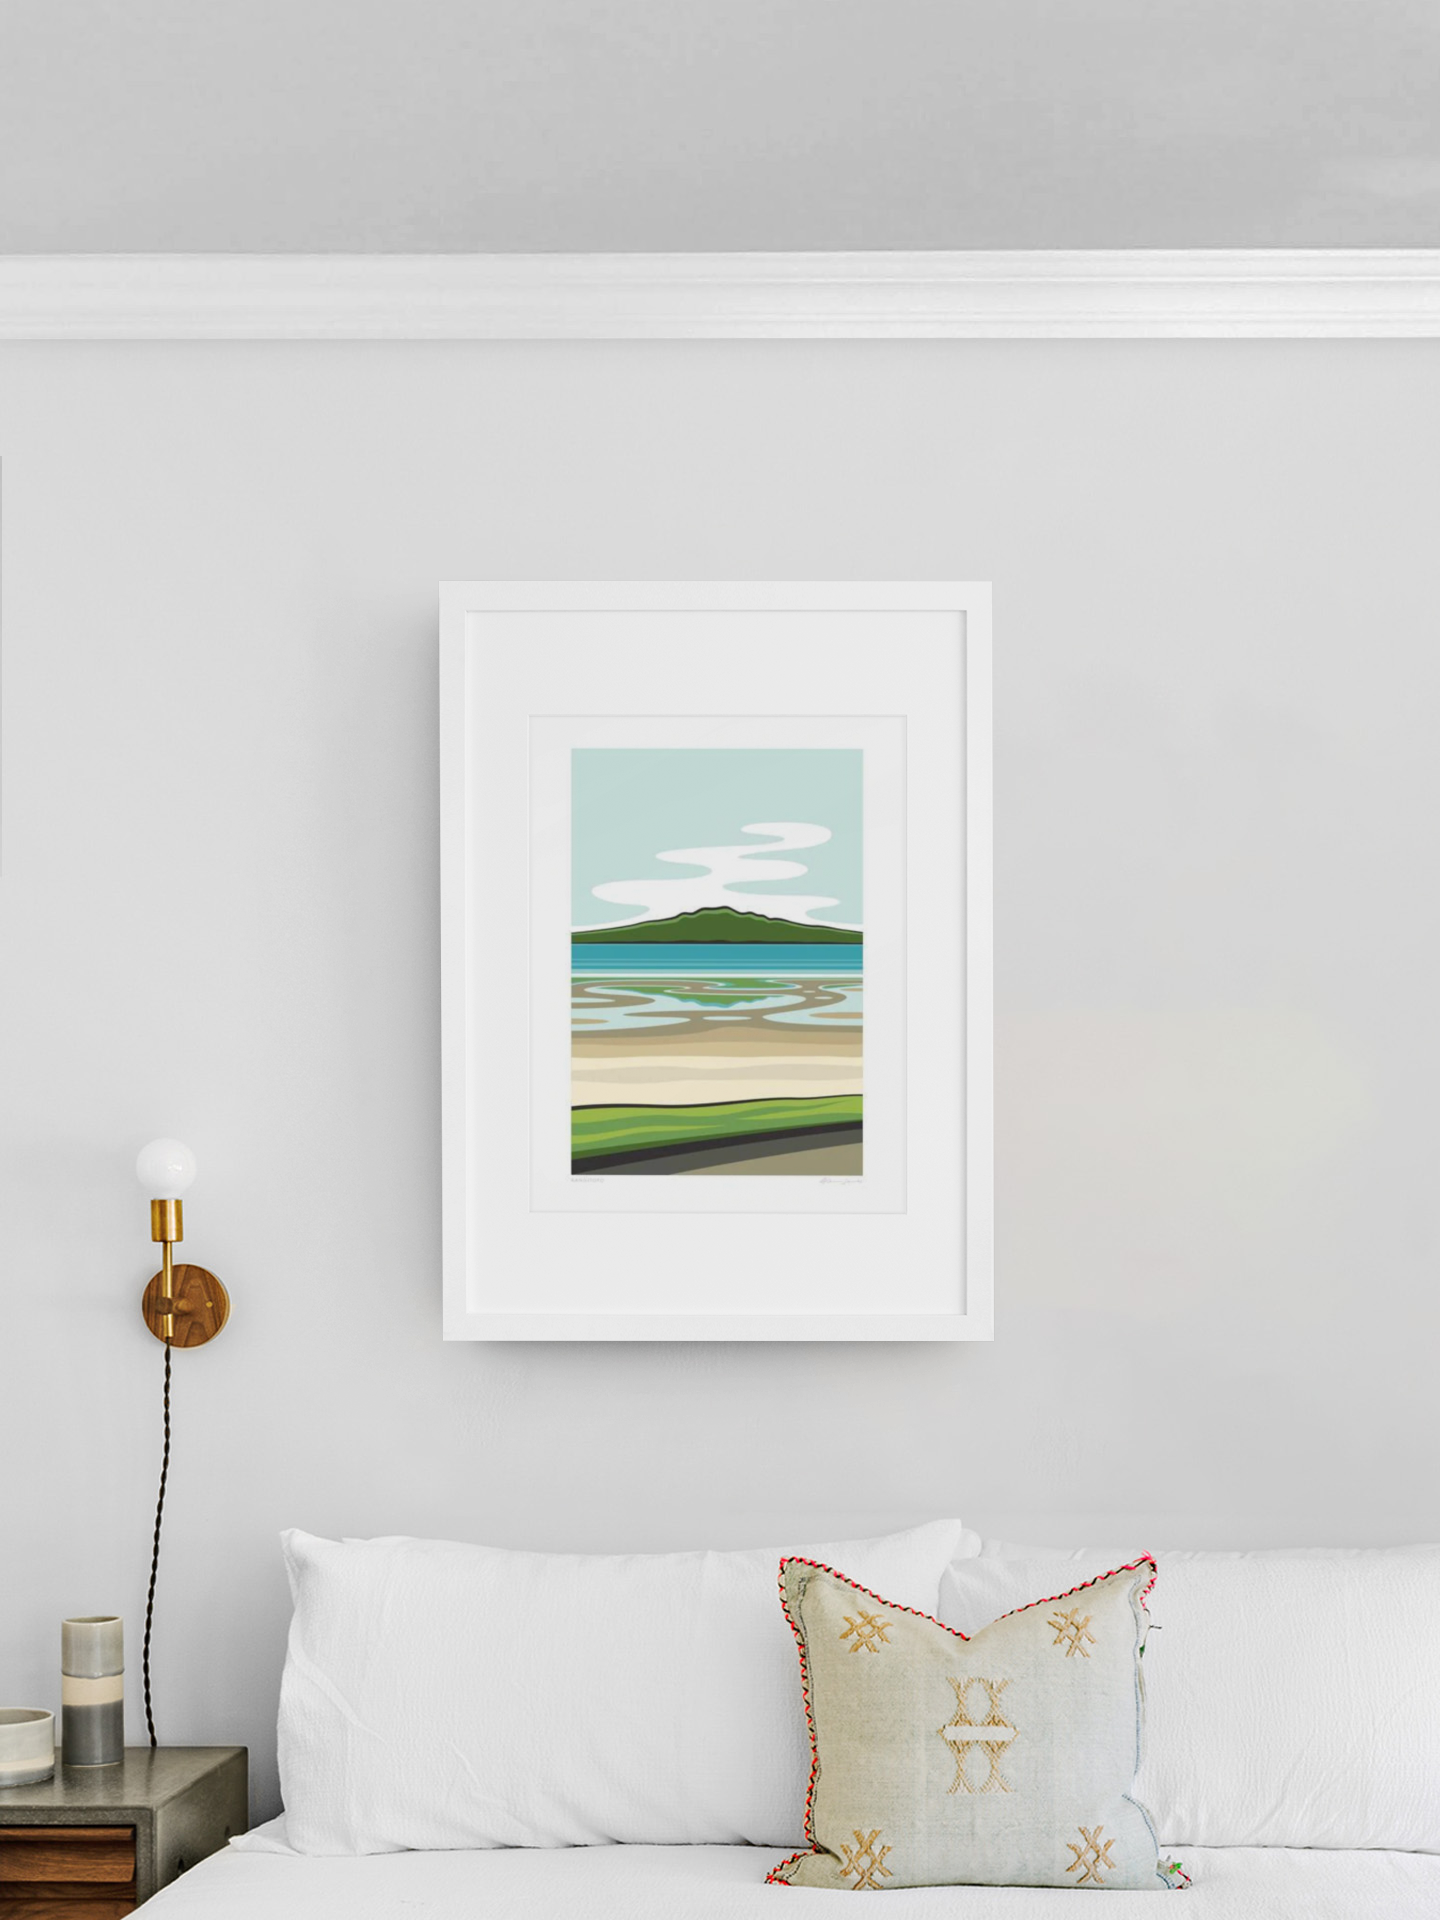 A serene landscape painting from the Rangitoto by Glenn Jones Series, depicting abstract green hills and a soft blue sky with hints of Auckland's Rangitoto Island, hangs on a clean, white wall above.